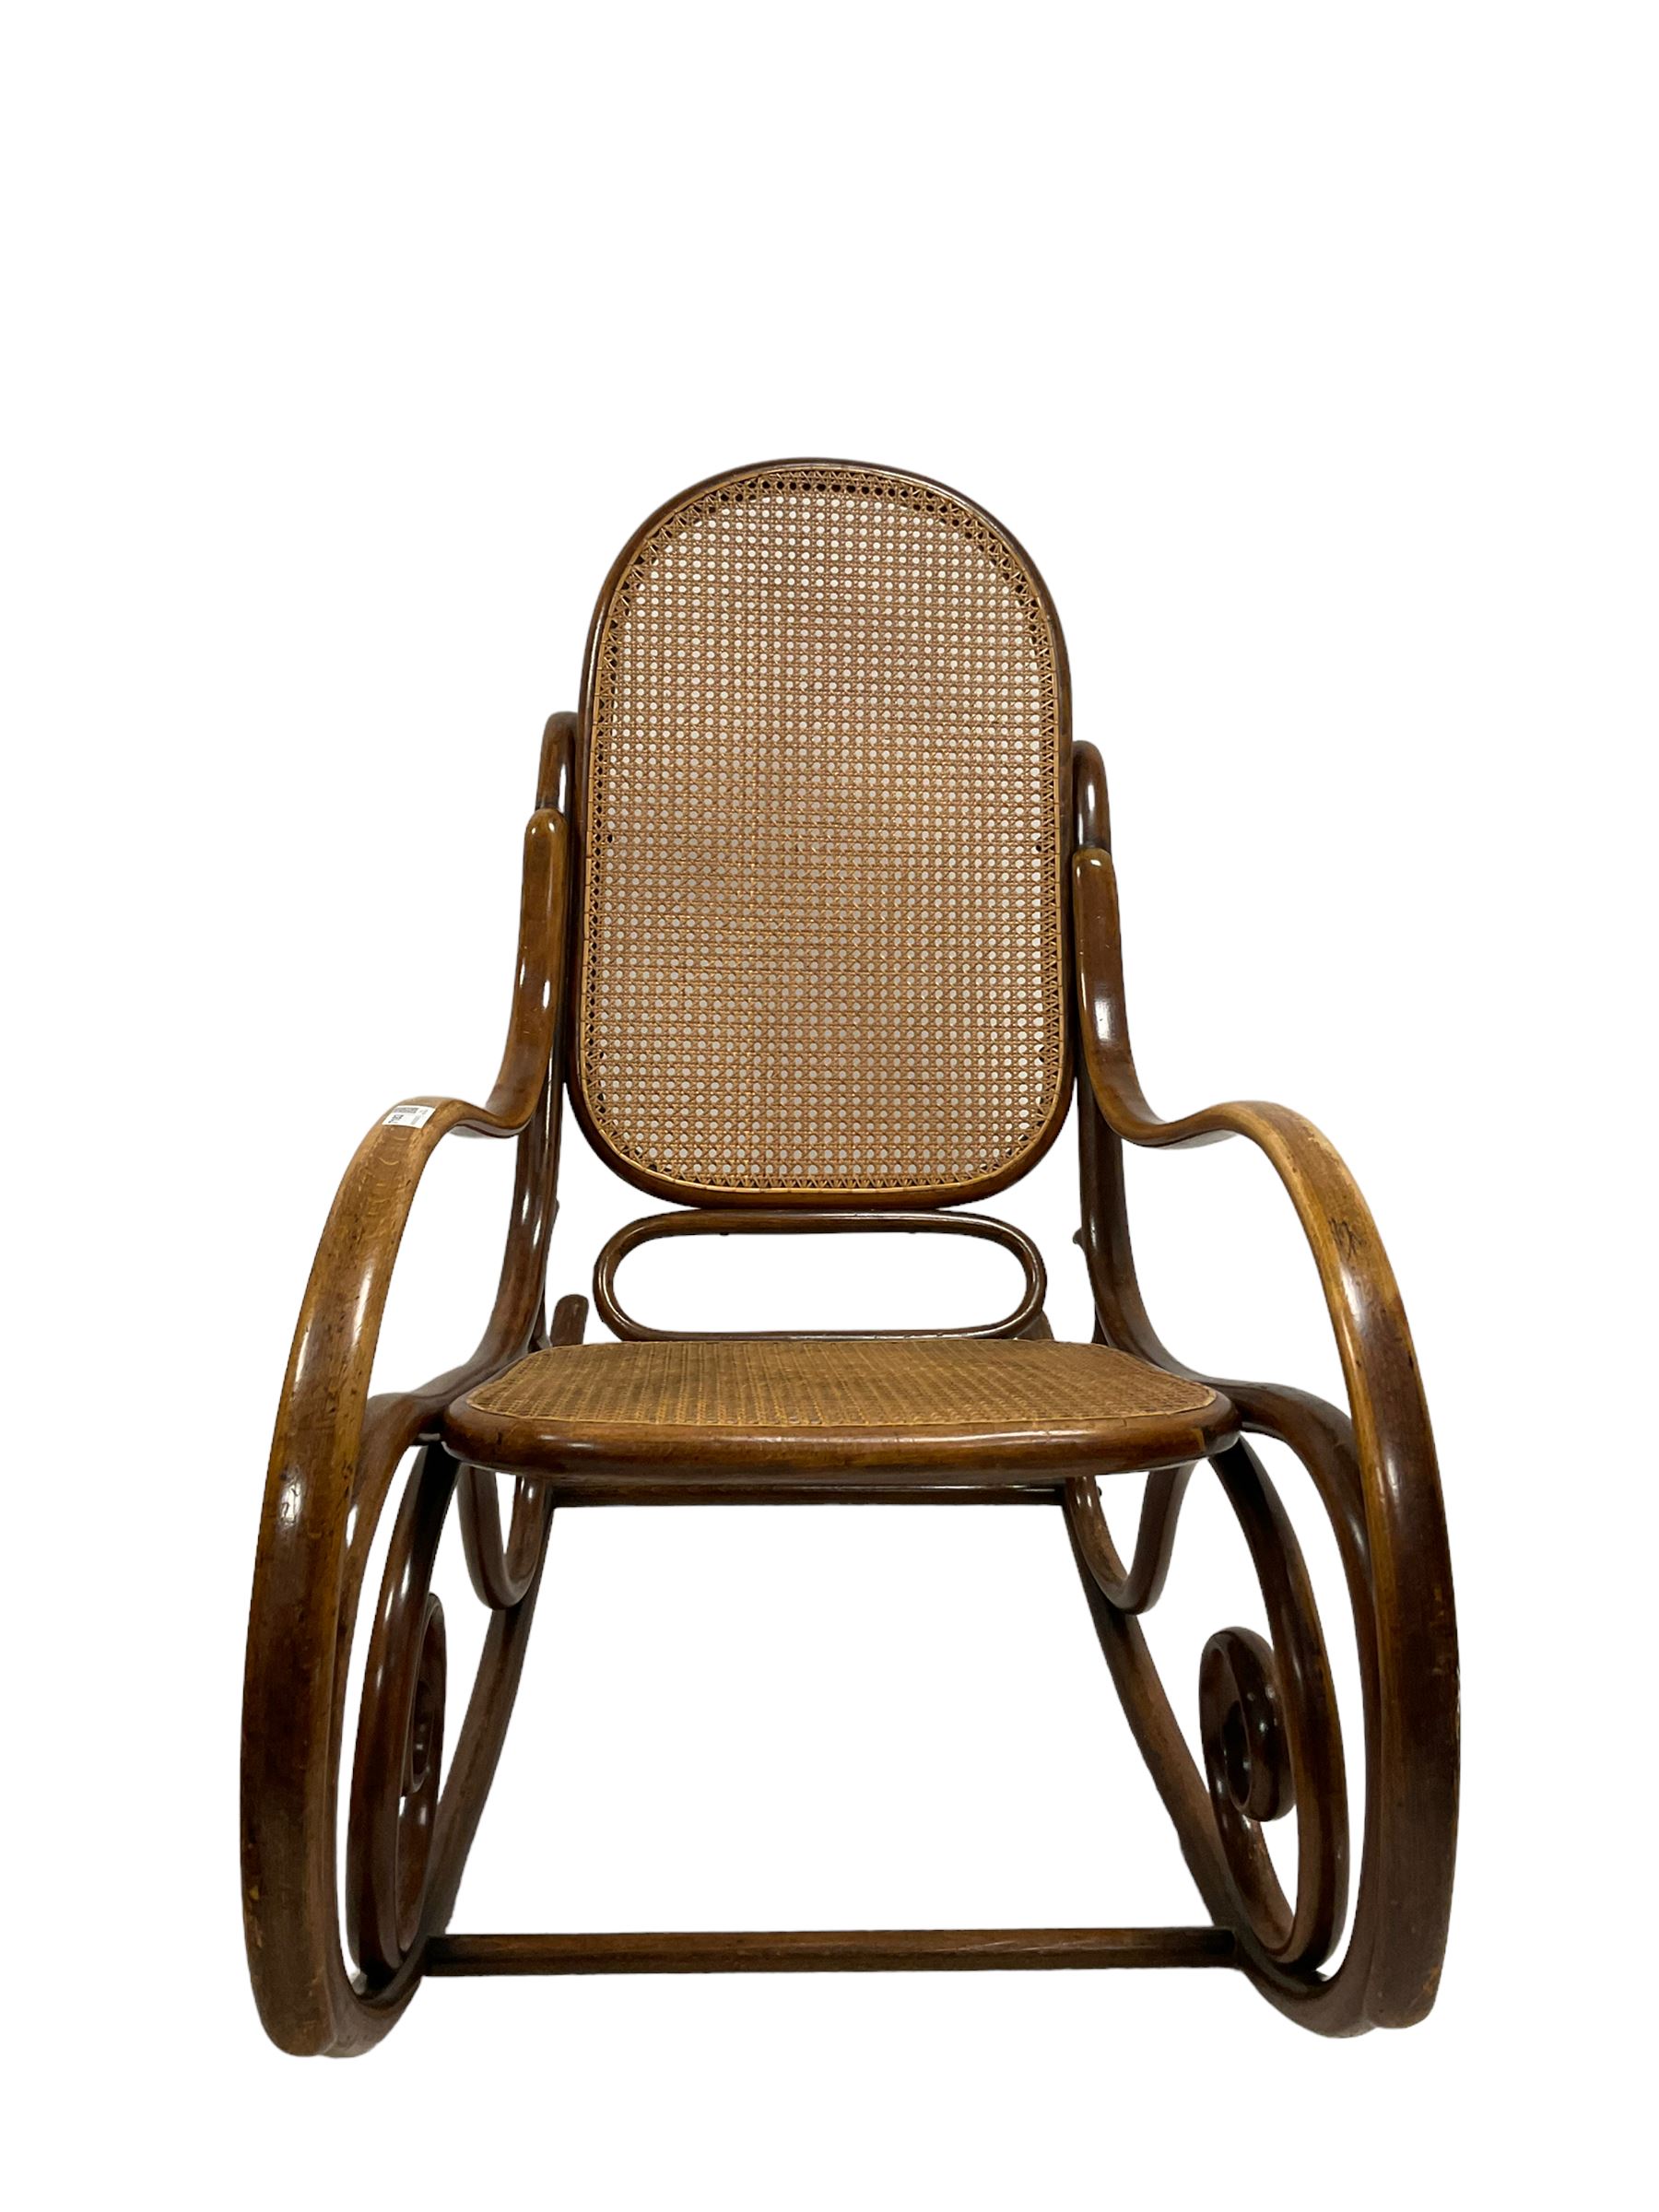 20th century bentwood rocking chair - Image 3 of 3